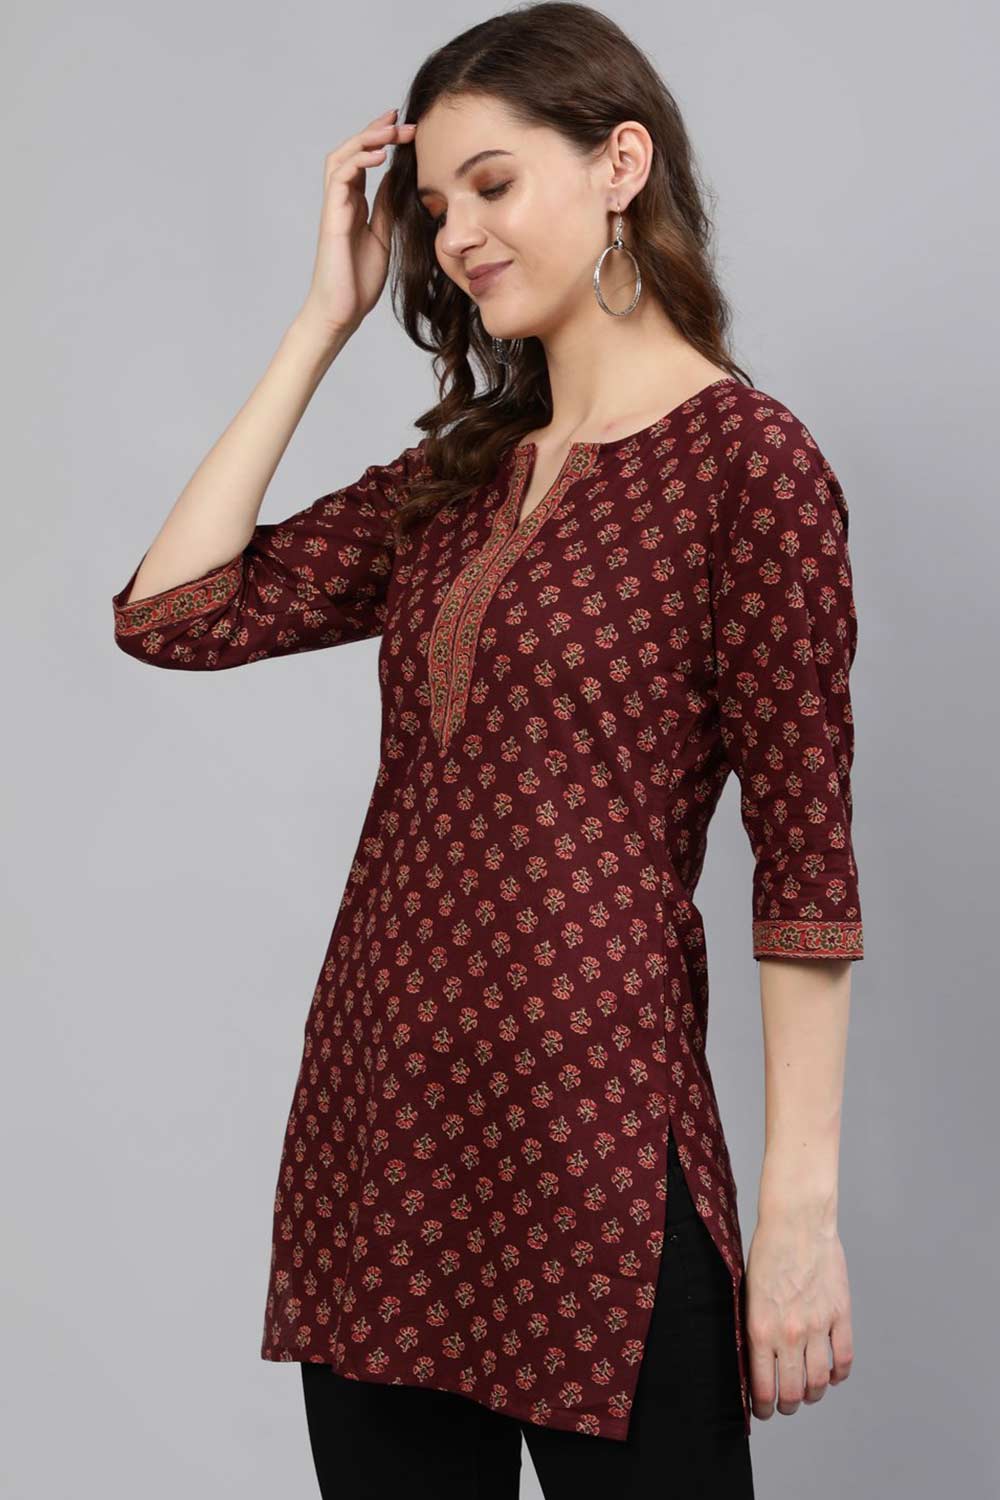 Buy Burgundy Cotton Floral Printed Tunic Online - Front